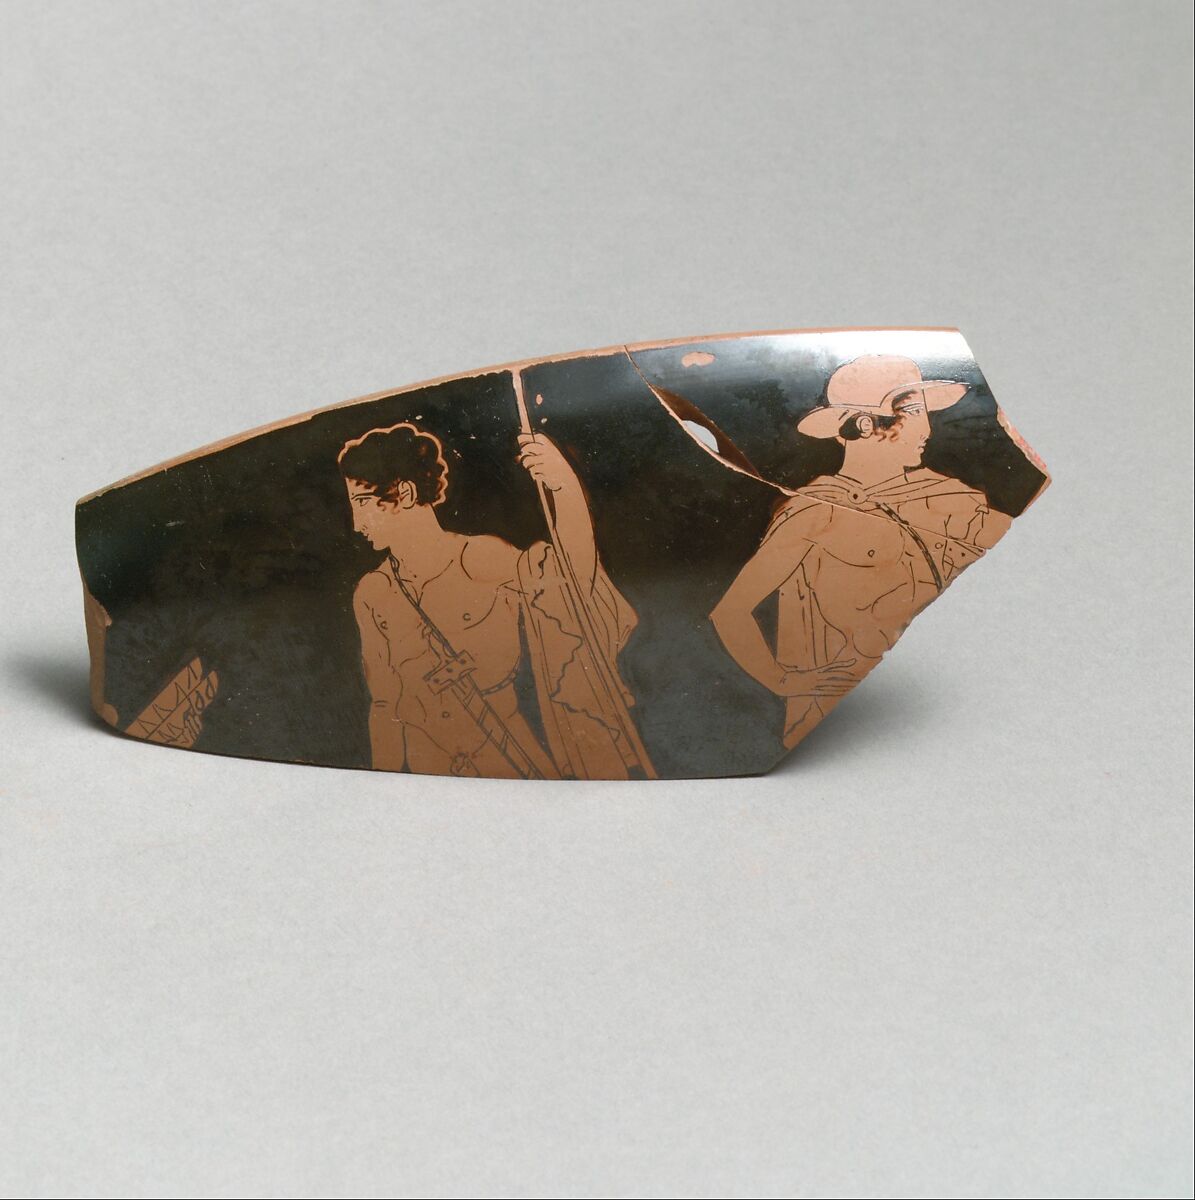 Fragment of a terracotta kylix (drinking cup), Attributed to the Codrus Painter, Terracotta, Greek, Attic 